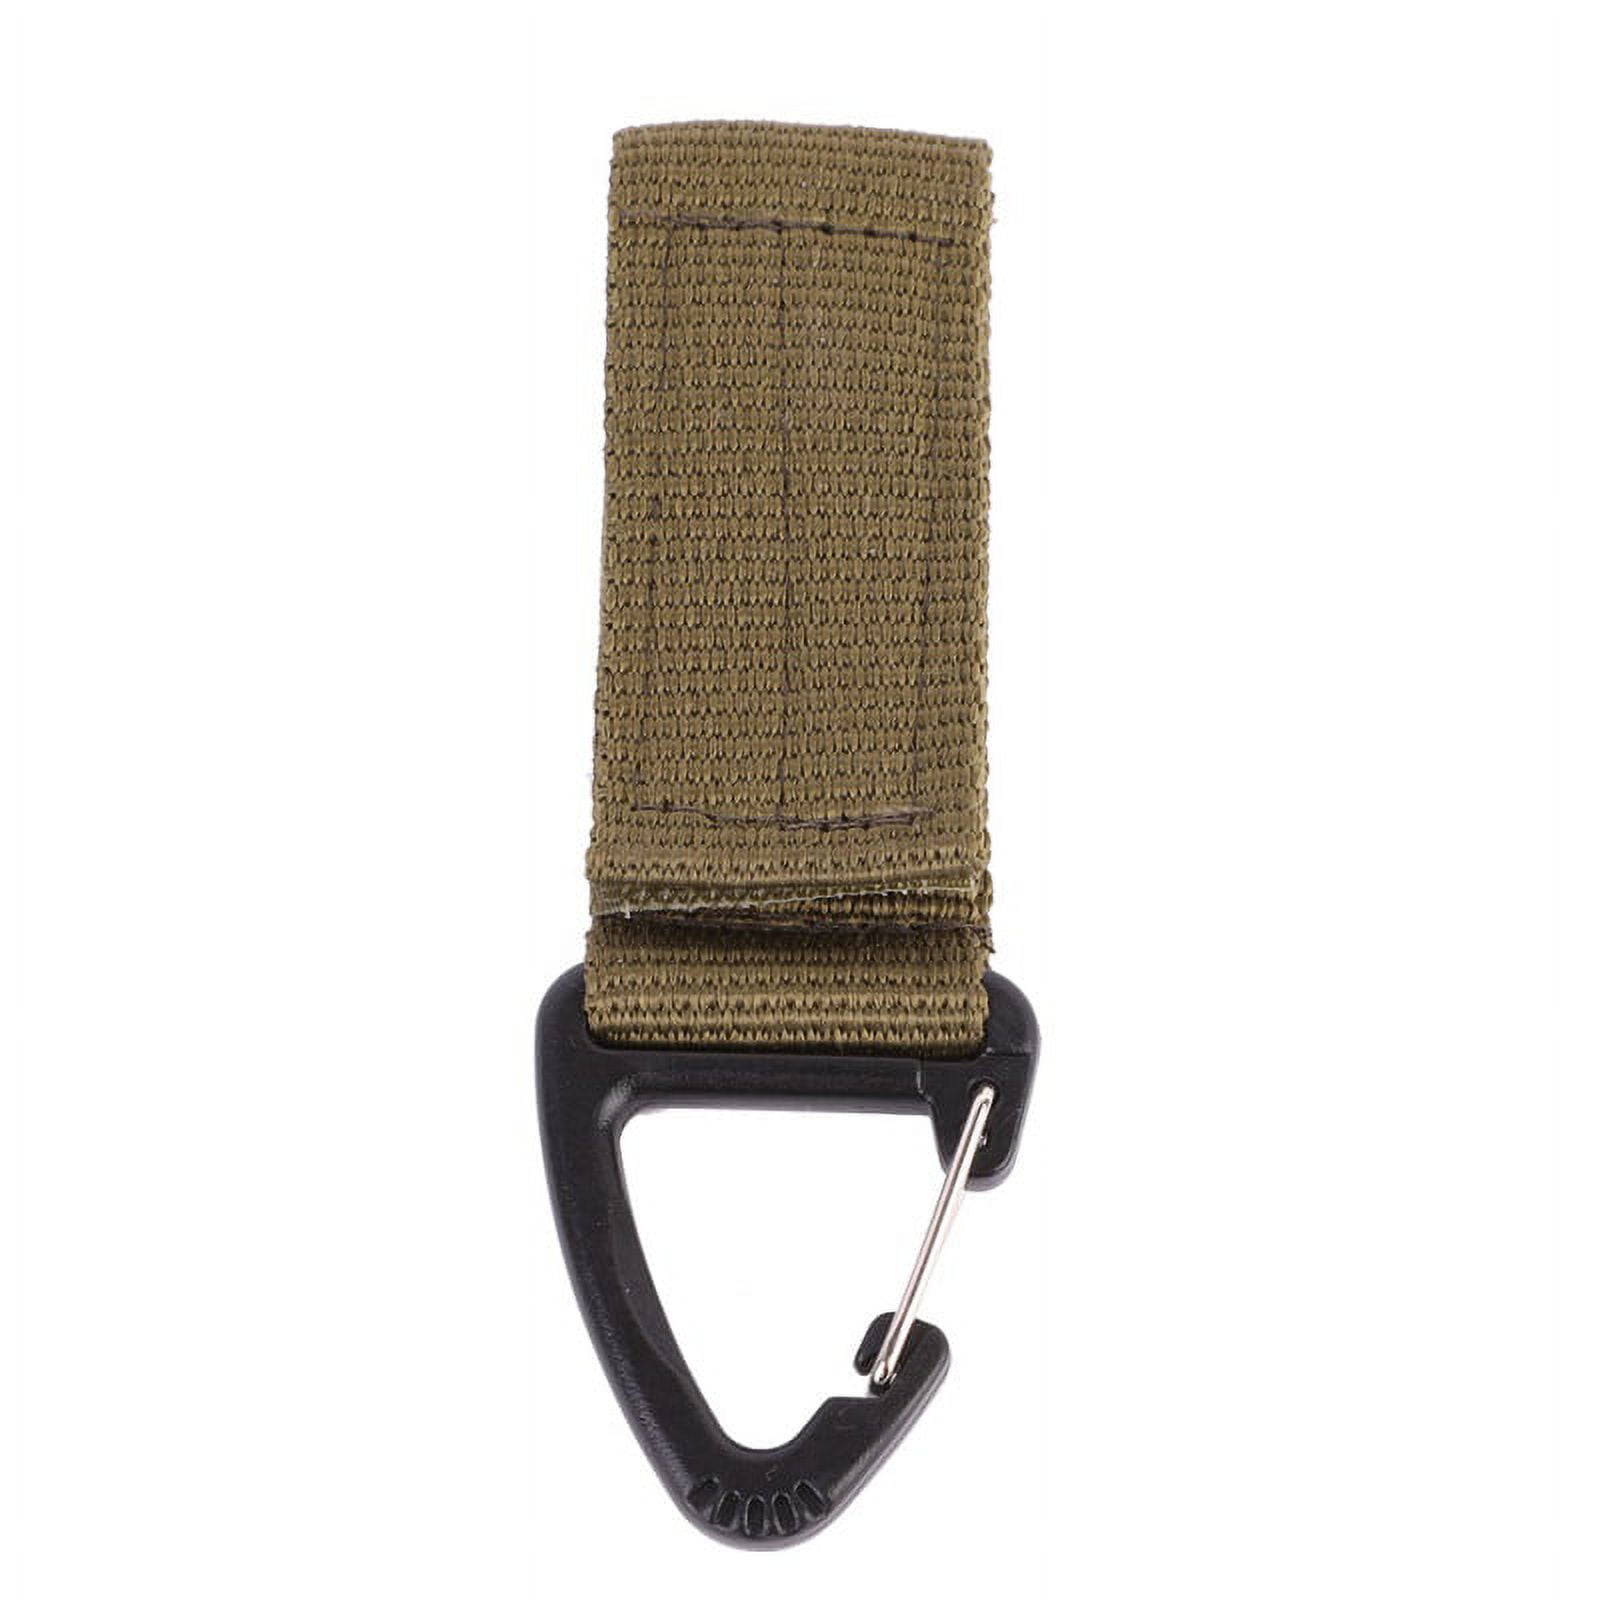 Tactical Molle Nylon Keychain Hook Web Carabiner Belt Buckle for Outdoor  Camping